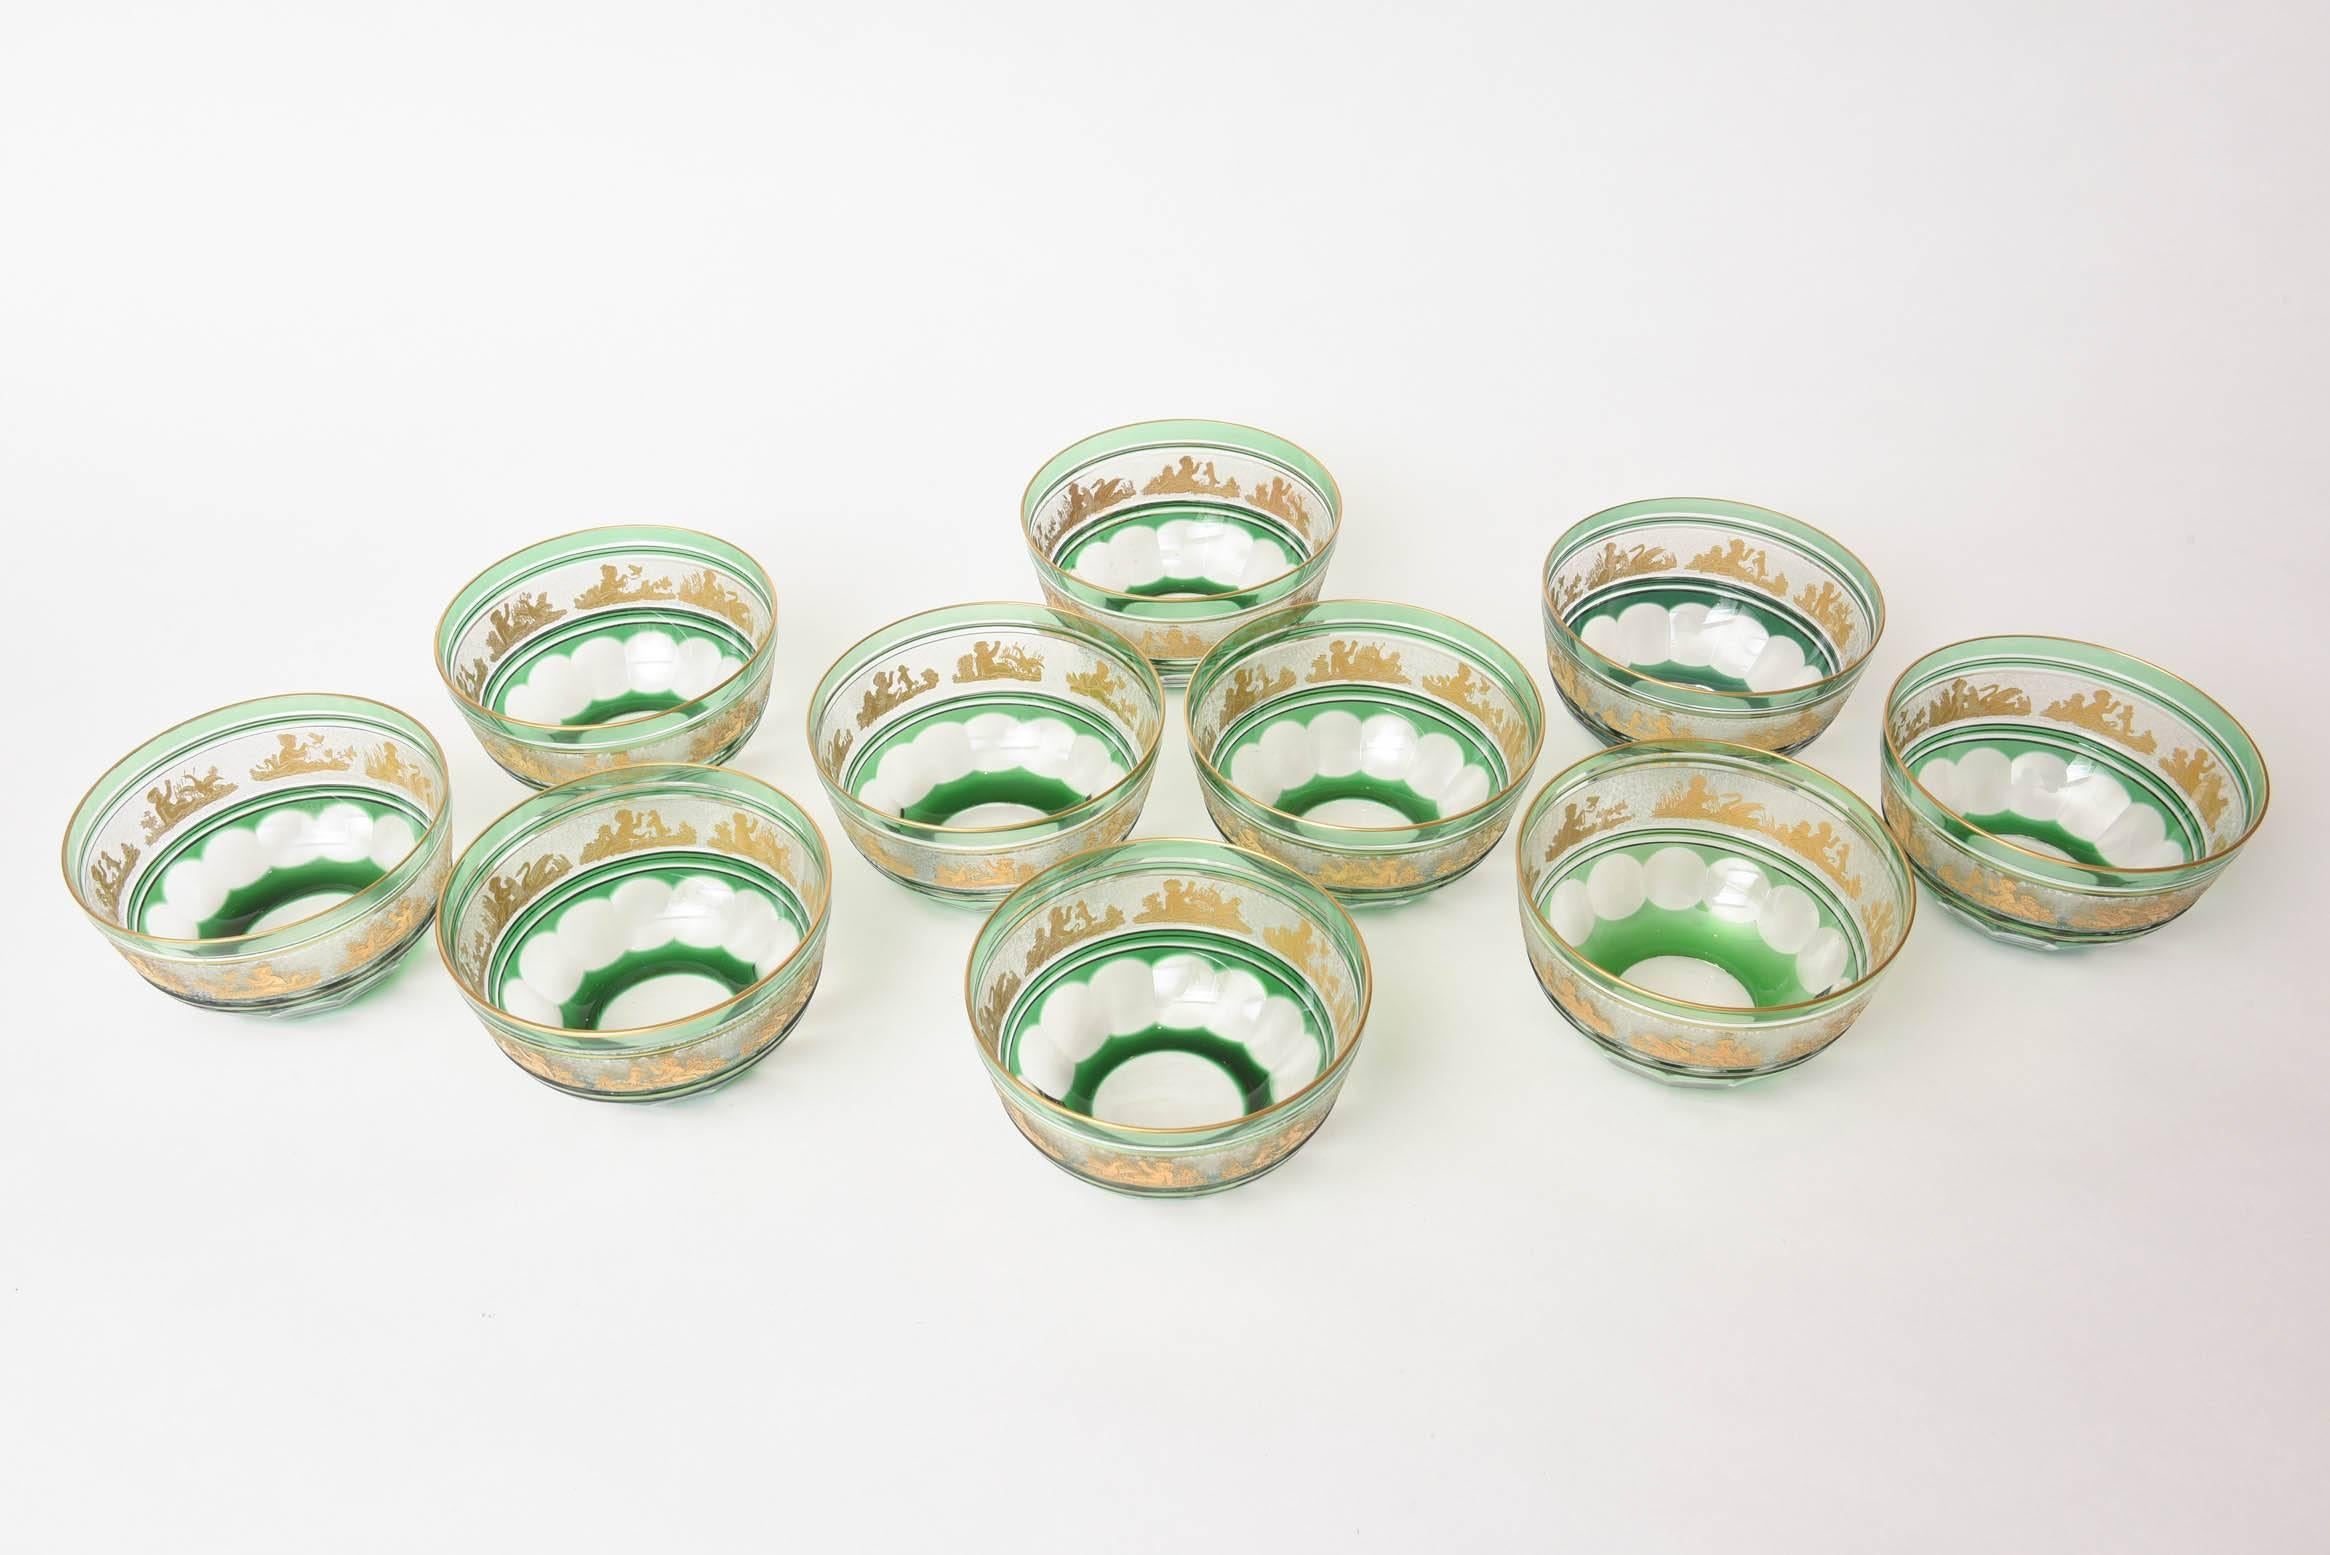 A classic and elegant pattern from the storied Belgium manufacturer. The gilded figures are on a finely done acid etched background and the green glass is crisply cut to the clear. A heavy weight and a nice size make these pieces very versatile.